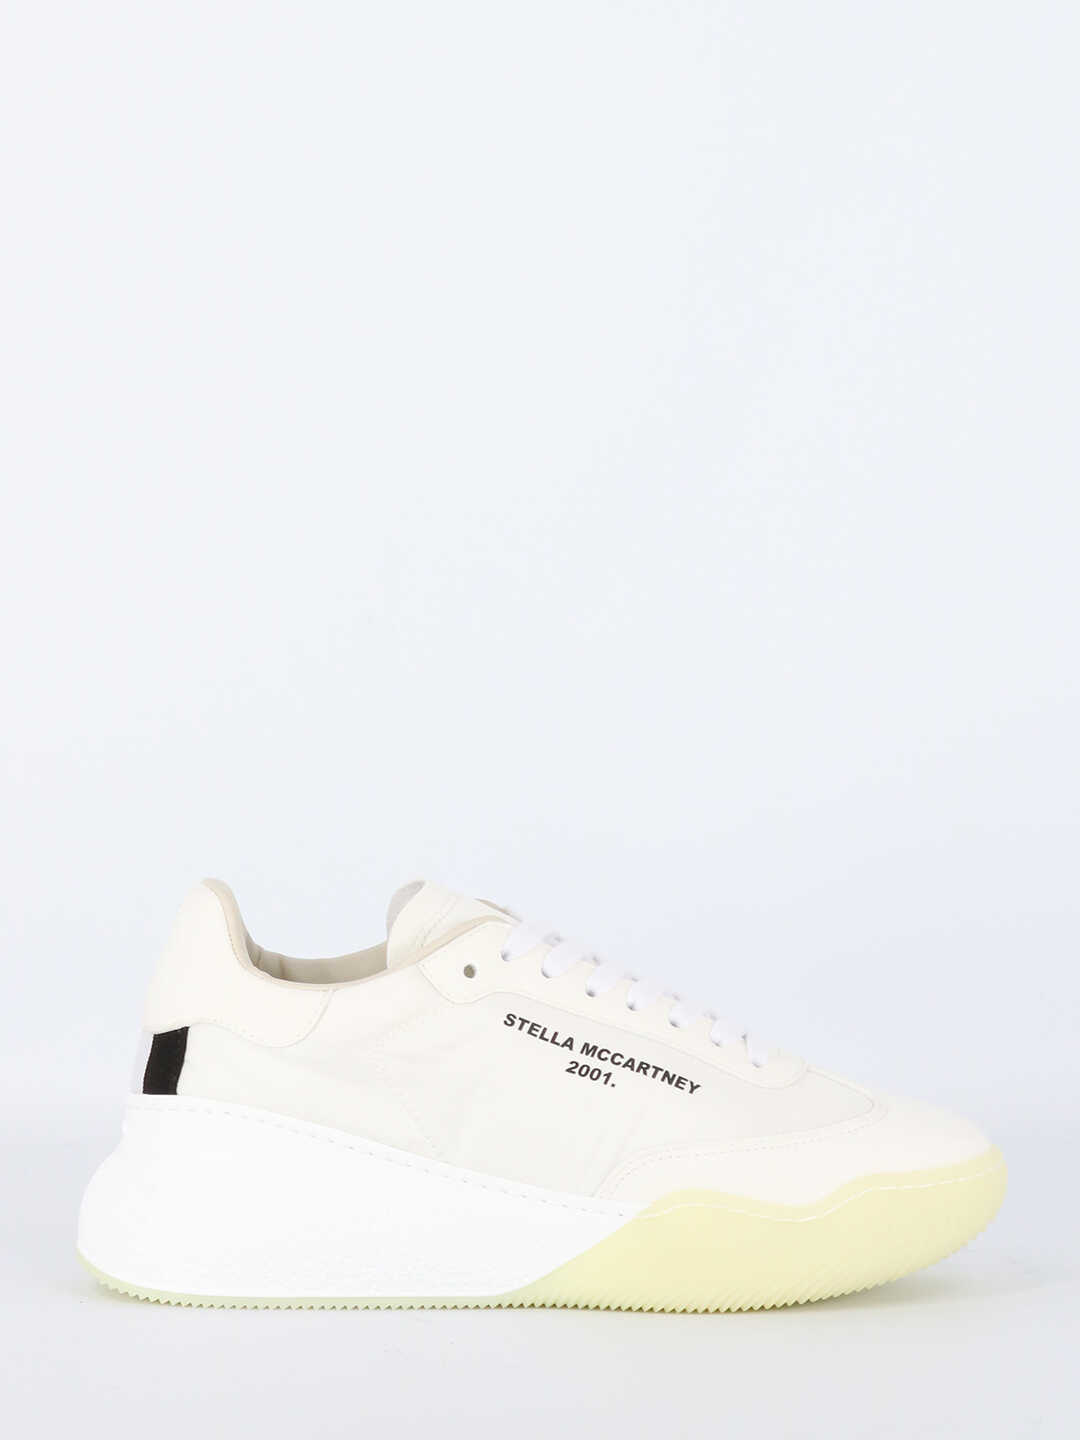 Stella McCartney Lace-Up White Sneakers 800145N0071 Cream image0